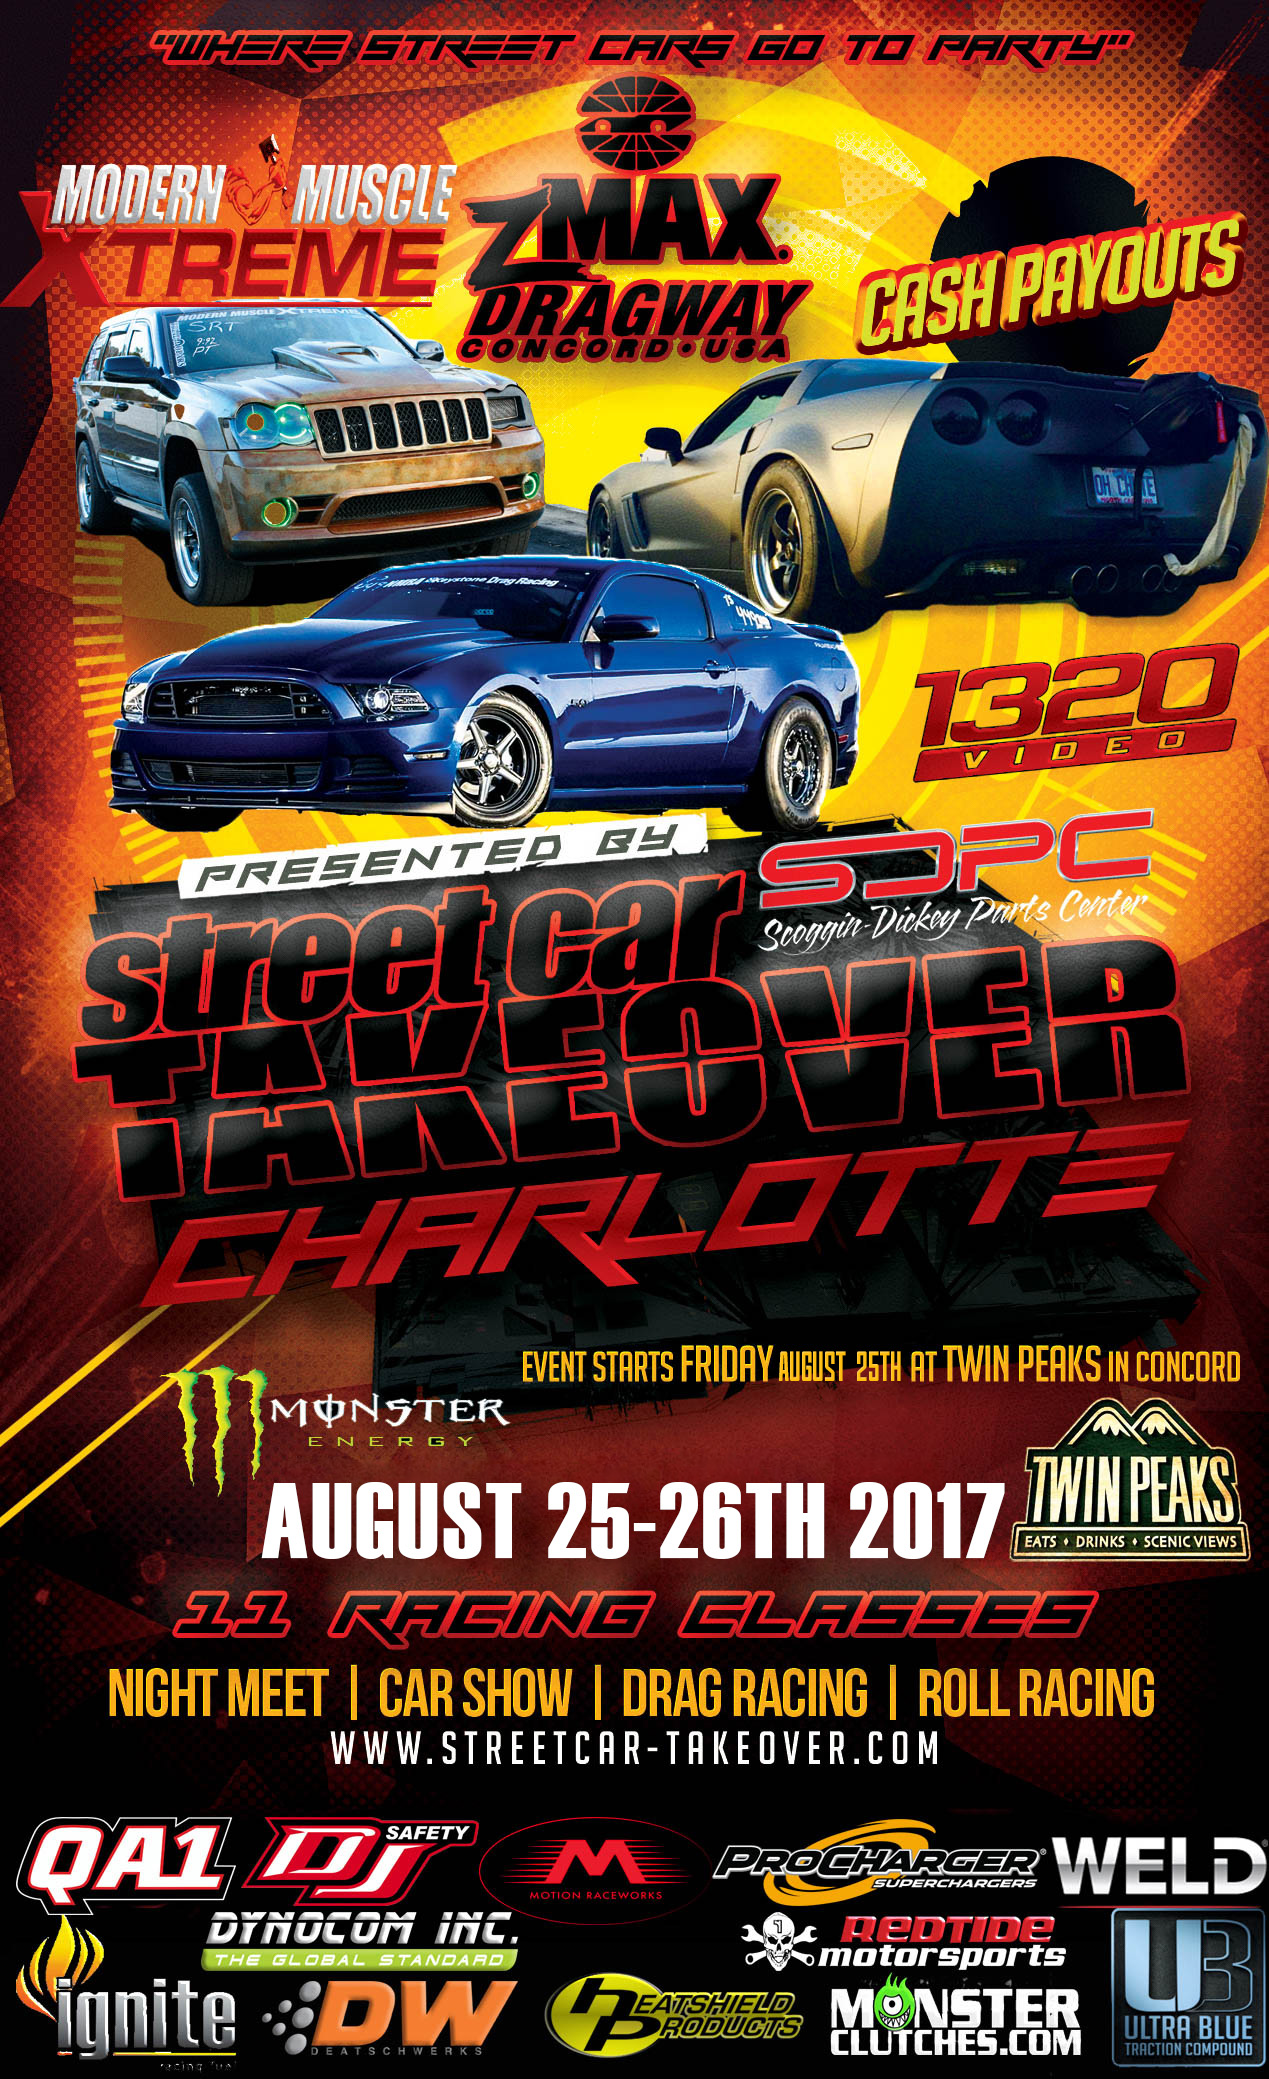 Street Car Takeover - Zmax Dragway, Charlotte, NC on August 25th - 26th!